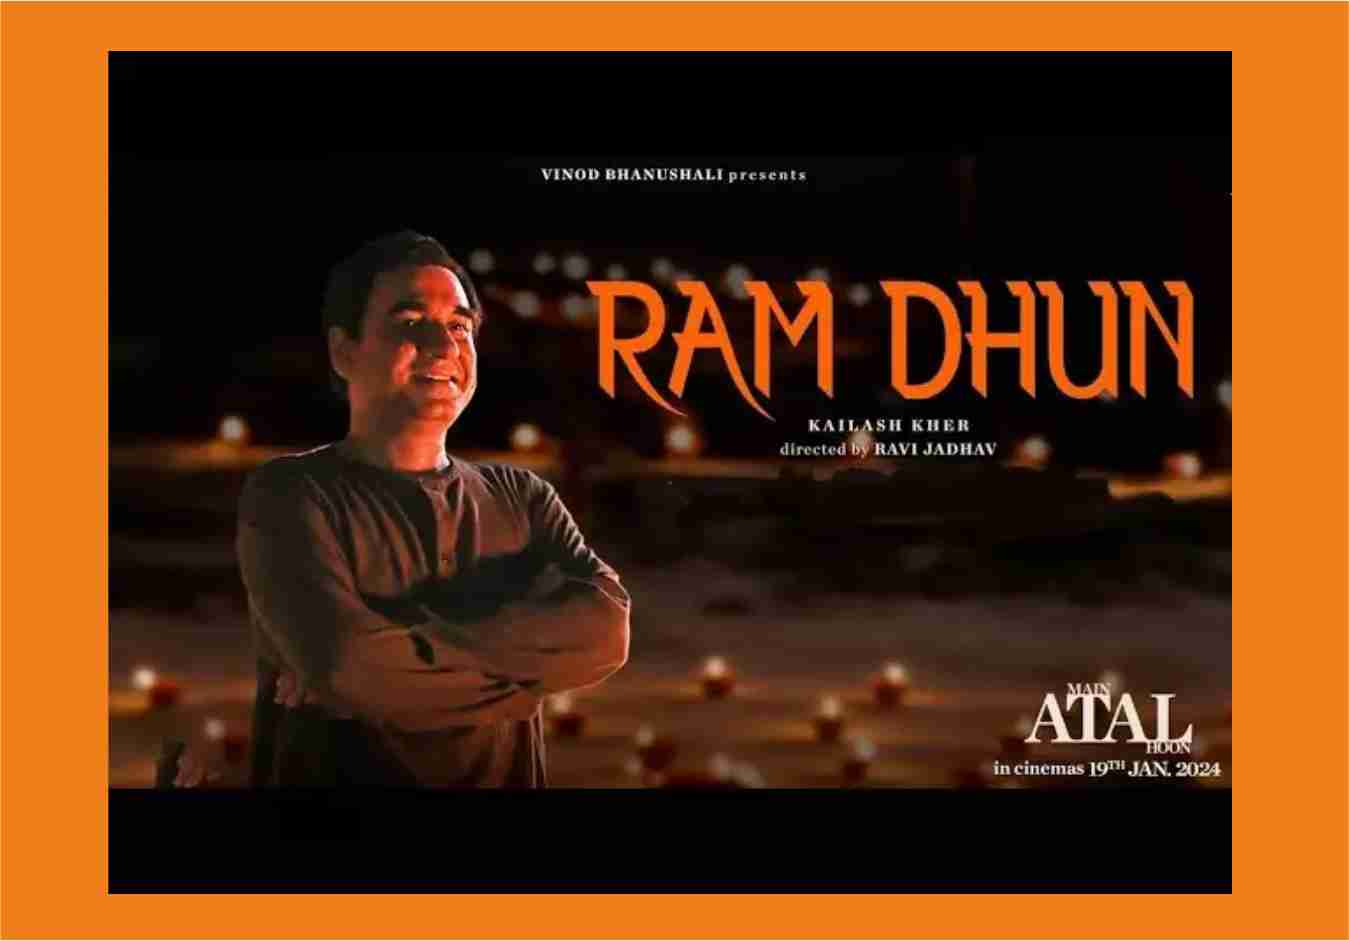 The song 'Ram Dhun' went viral as soon as it was released, Kailash Kher's voice made people crazy